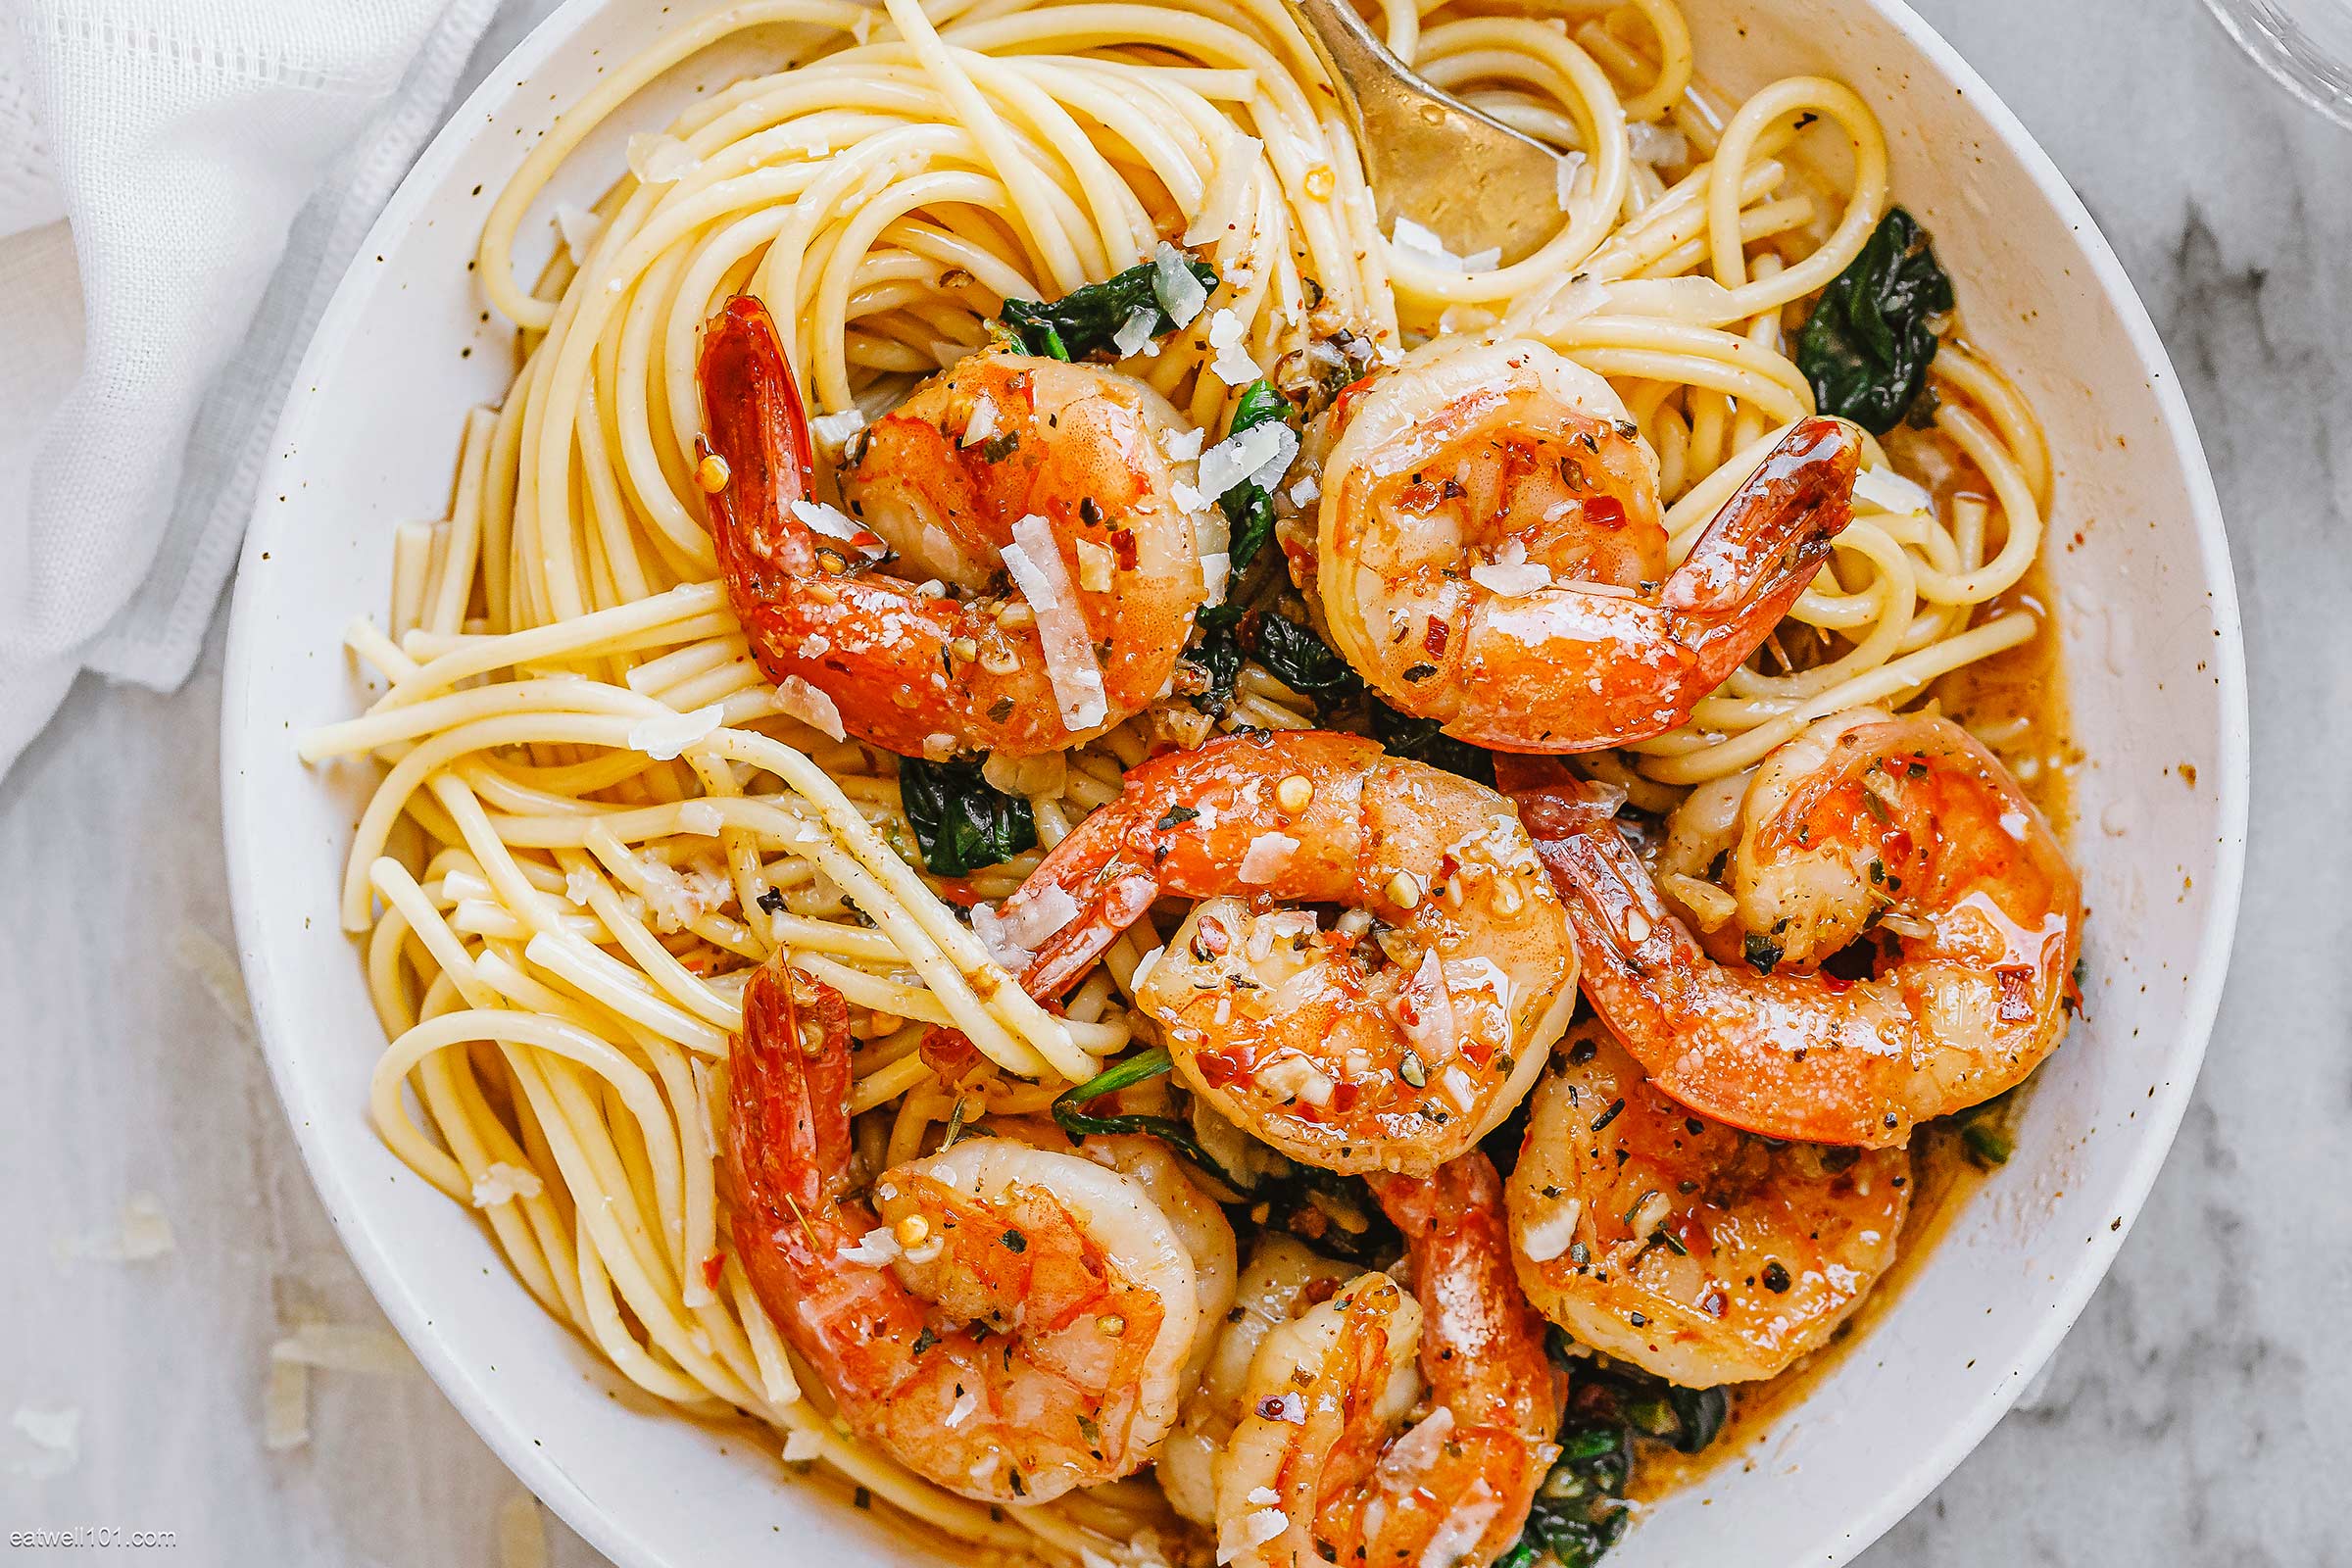 Garlic Butter Shrimp Pasta Recipe with Spinach – How to Cook Shrimp